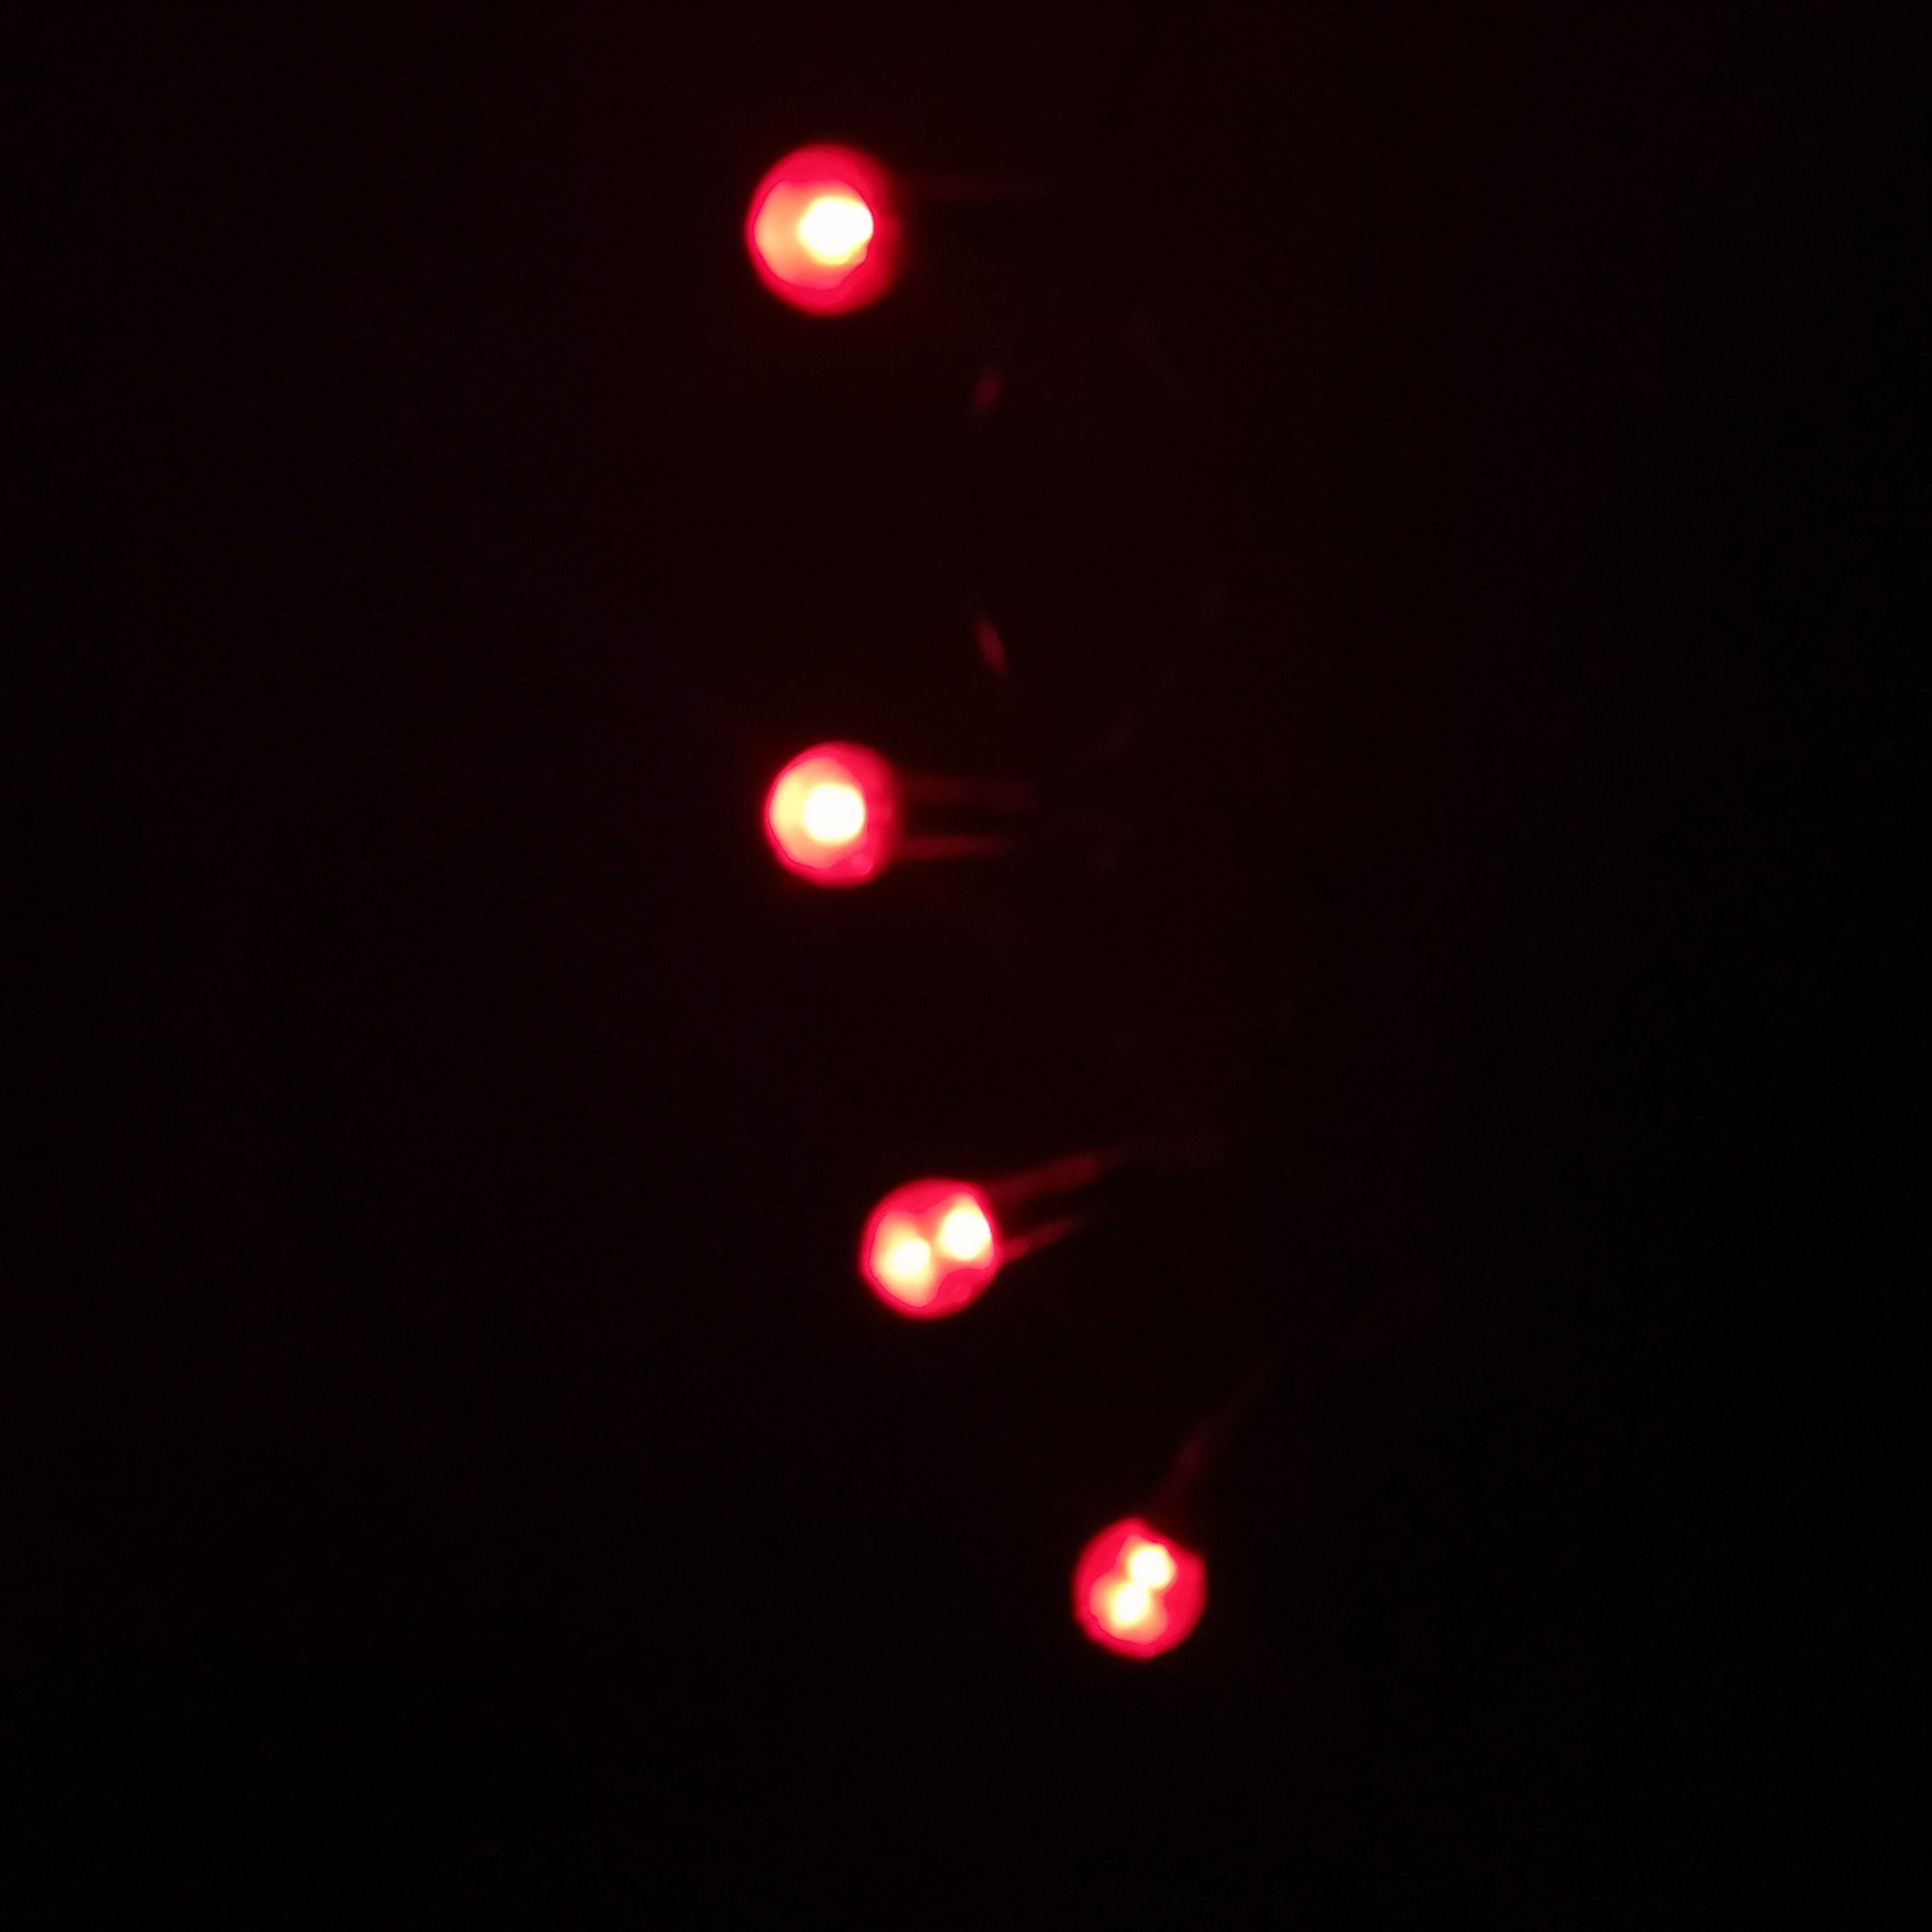 Festive Indoor Outdoor 120 Red Berry Christmas Lights Multi-Function With Timer